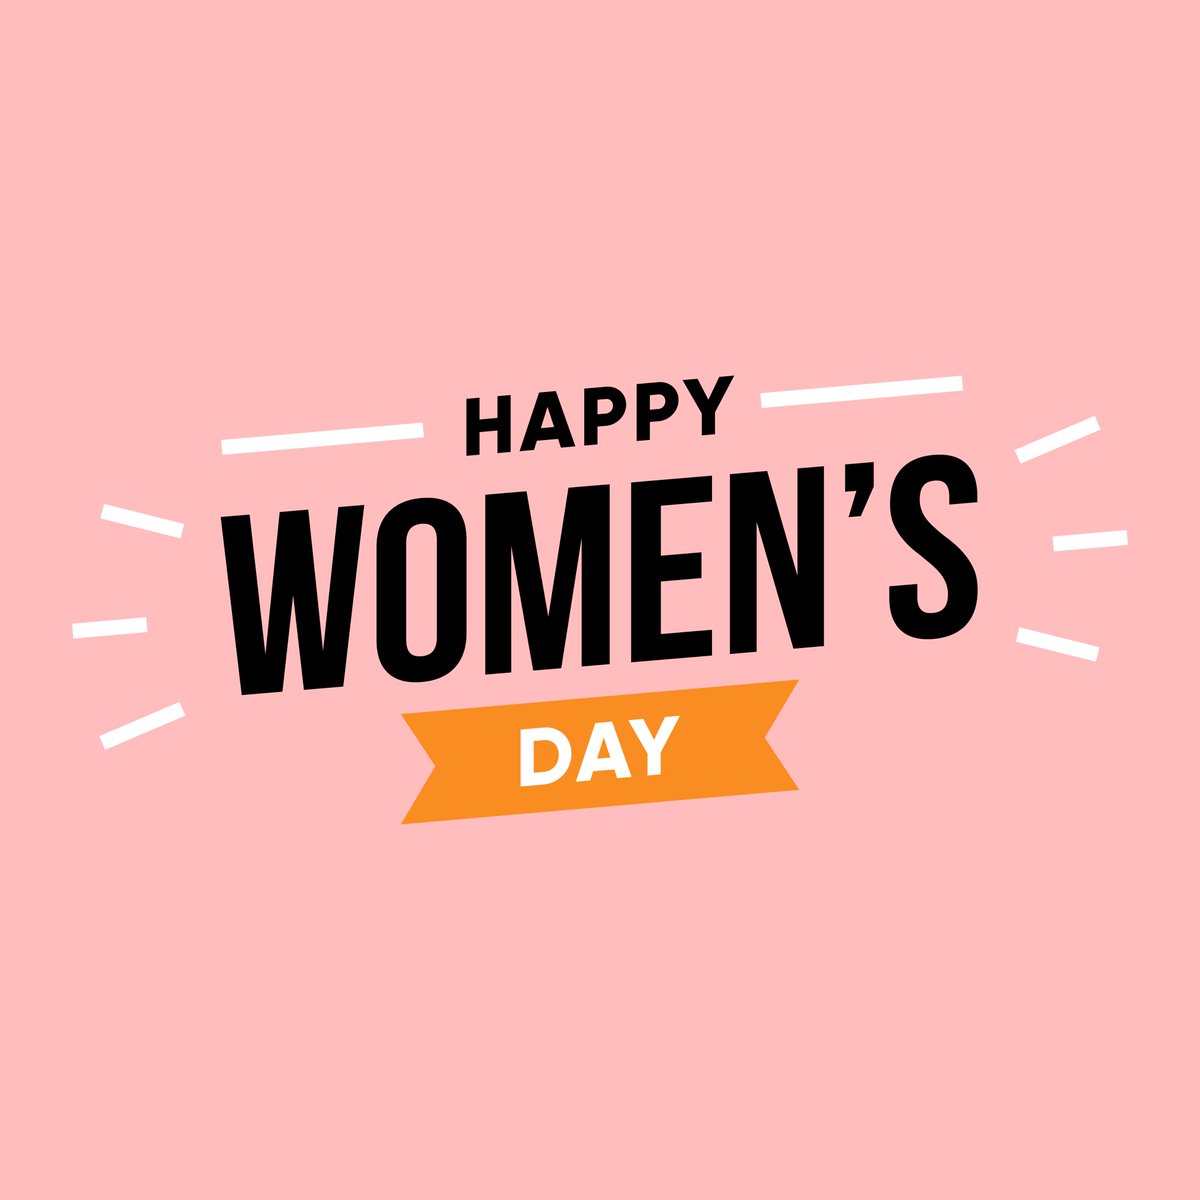 Happy International Women’s Day🧡💗 Refer a friend on the ZEUS app and get 2.50€ in credit! Get the girls together and go for a ride to celebrate🤩 #internationalwomensday #germany #deutschland